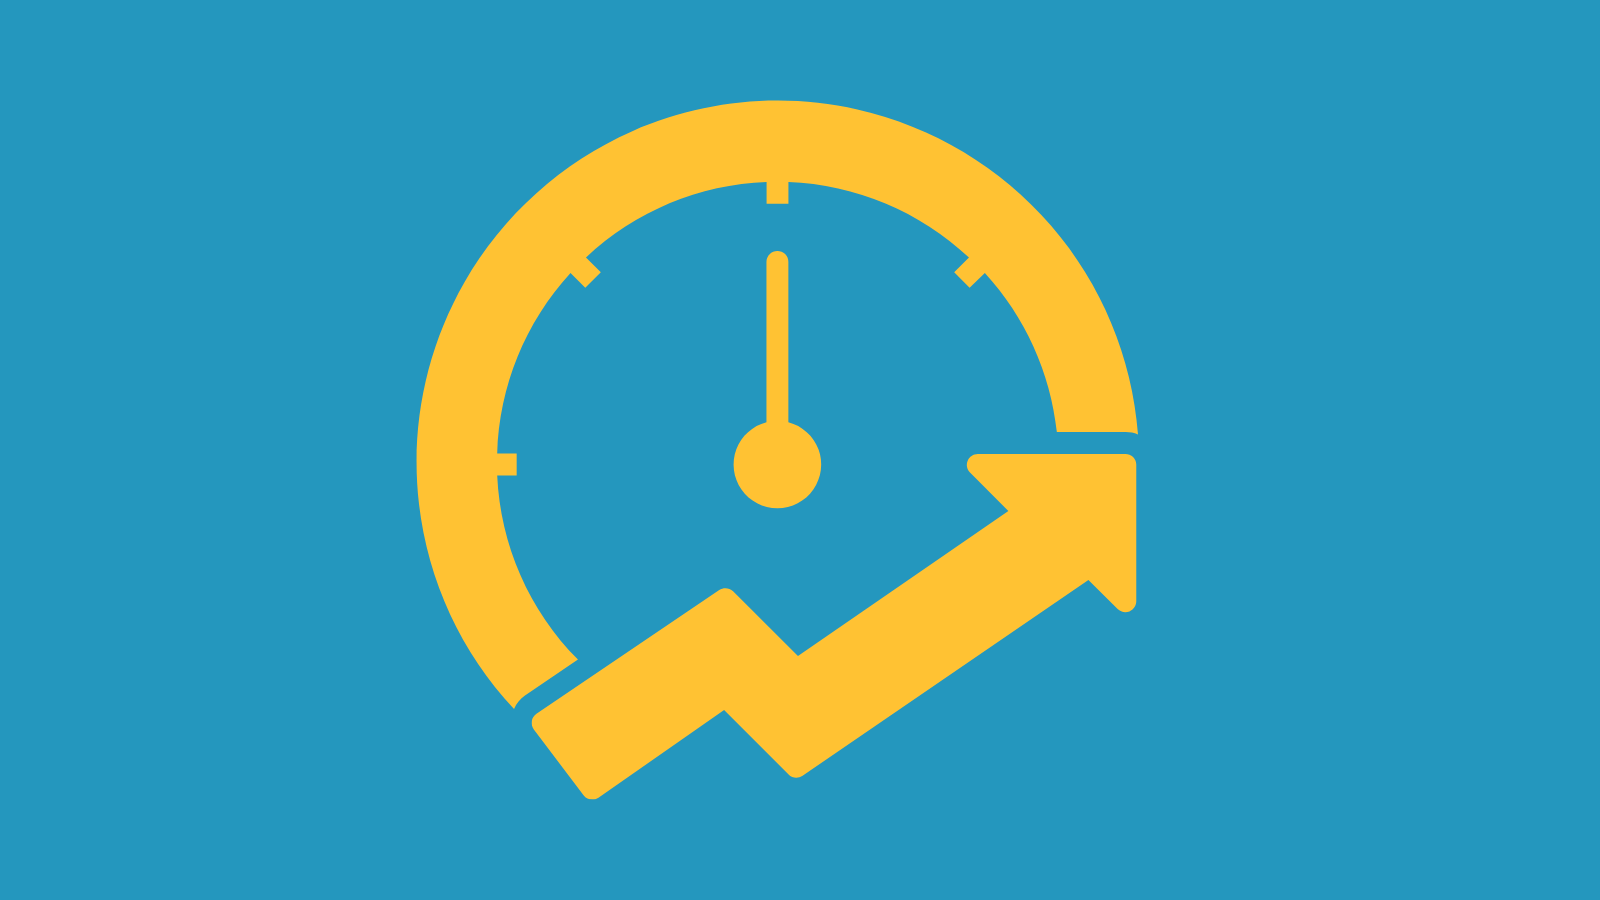 A graphic that combines a clock and a zigzagging upward arrow